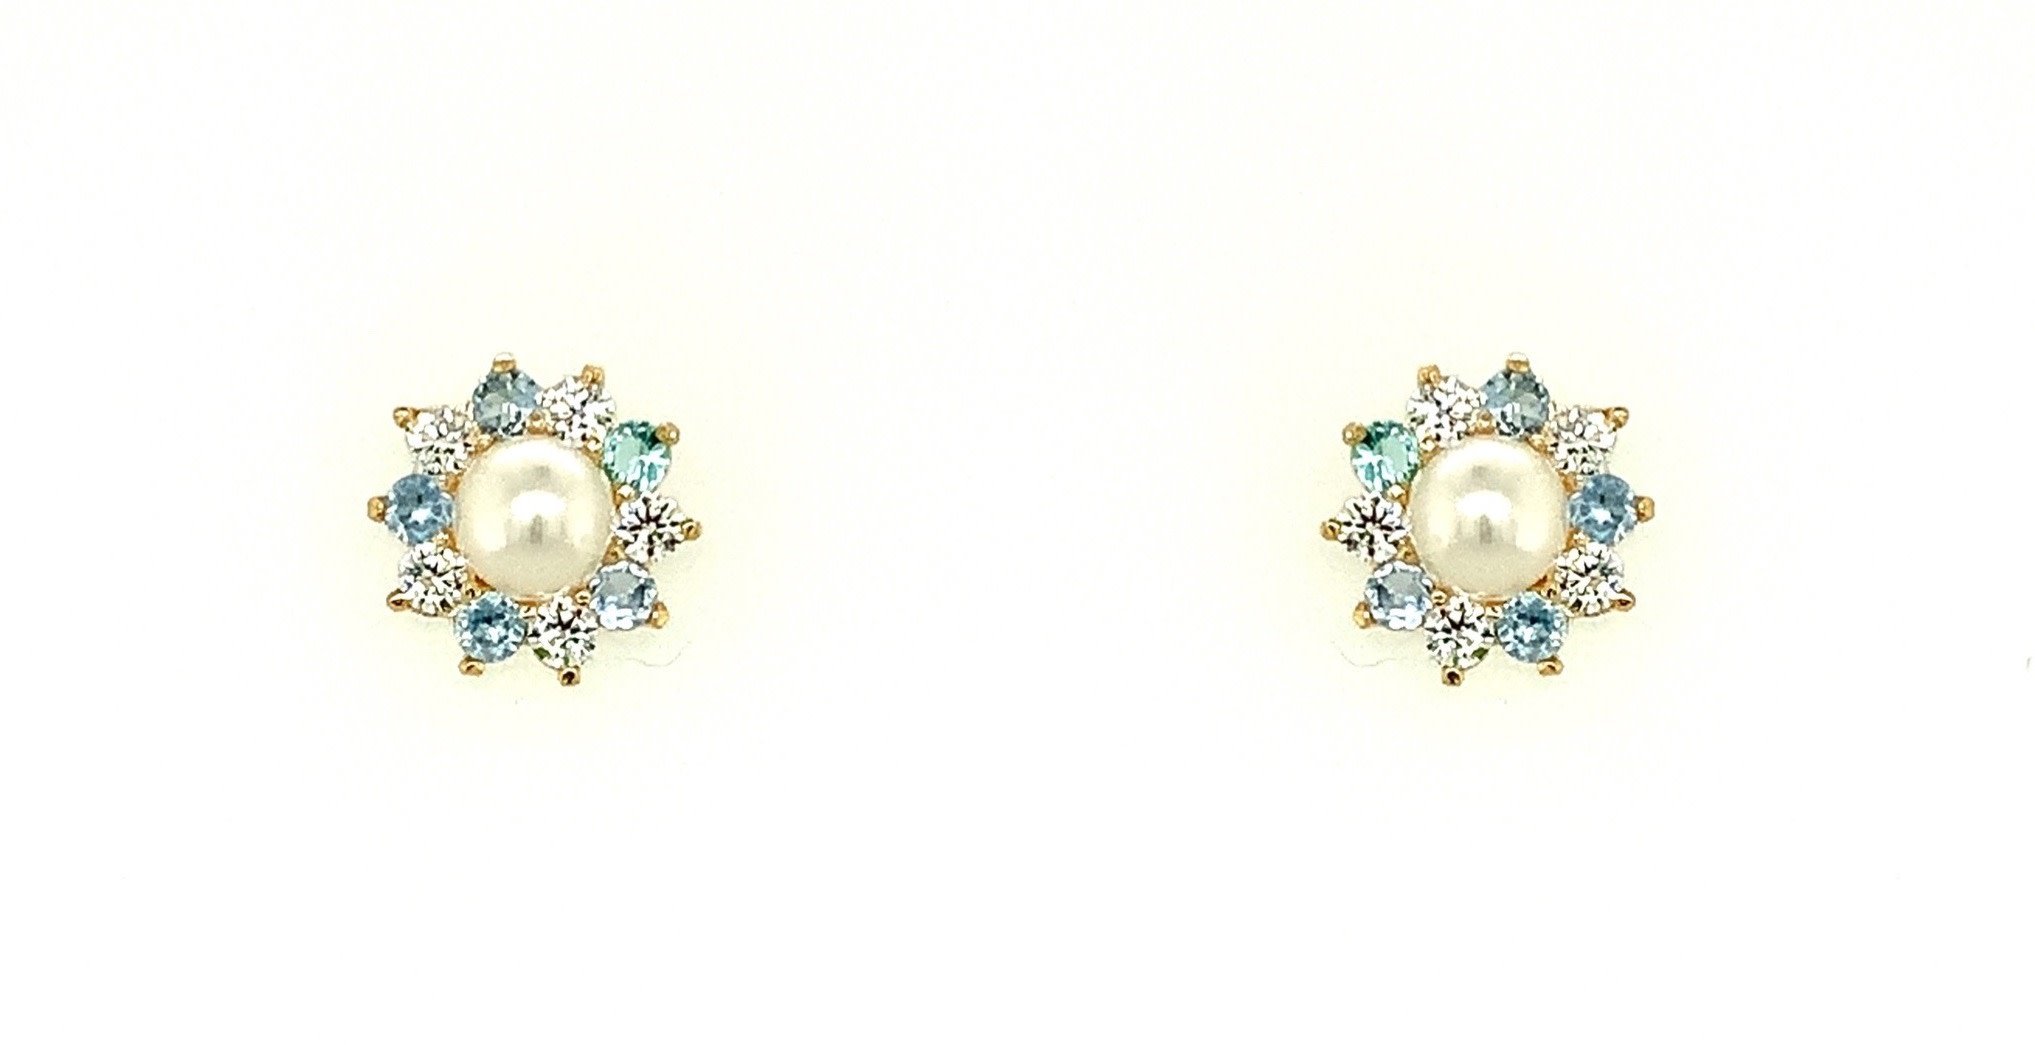 30539 14K YELLOW GOLD PEARL CENTER WITH LIGHT BLUE AND WHITE FLORAL HALO SCREW BACK STUDS